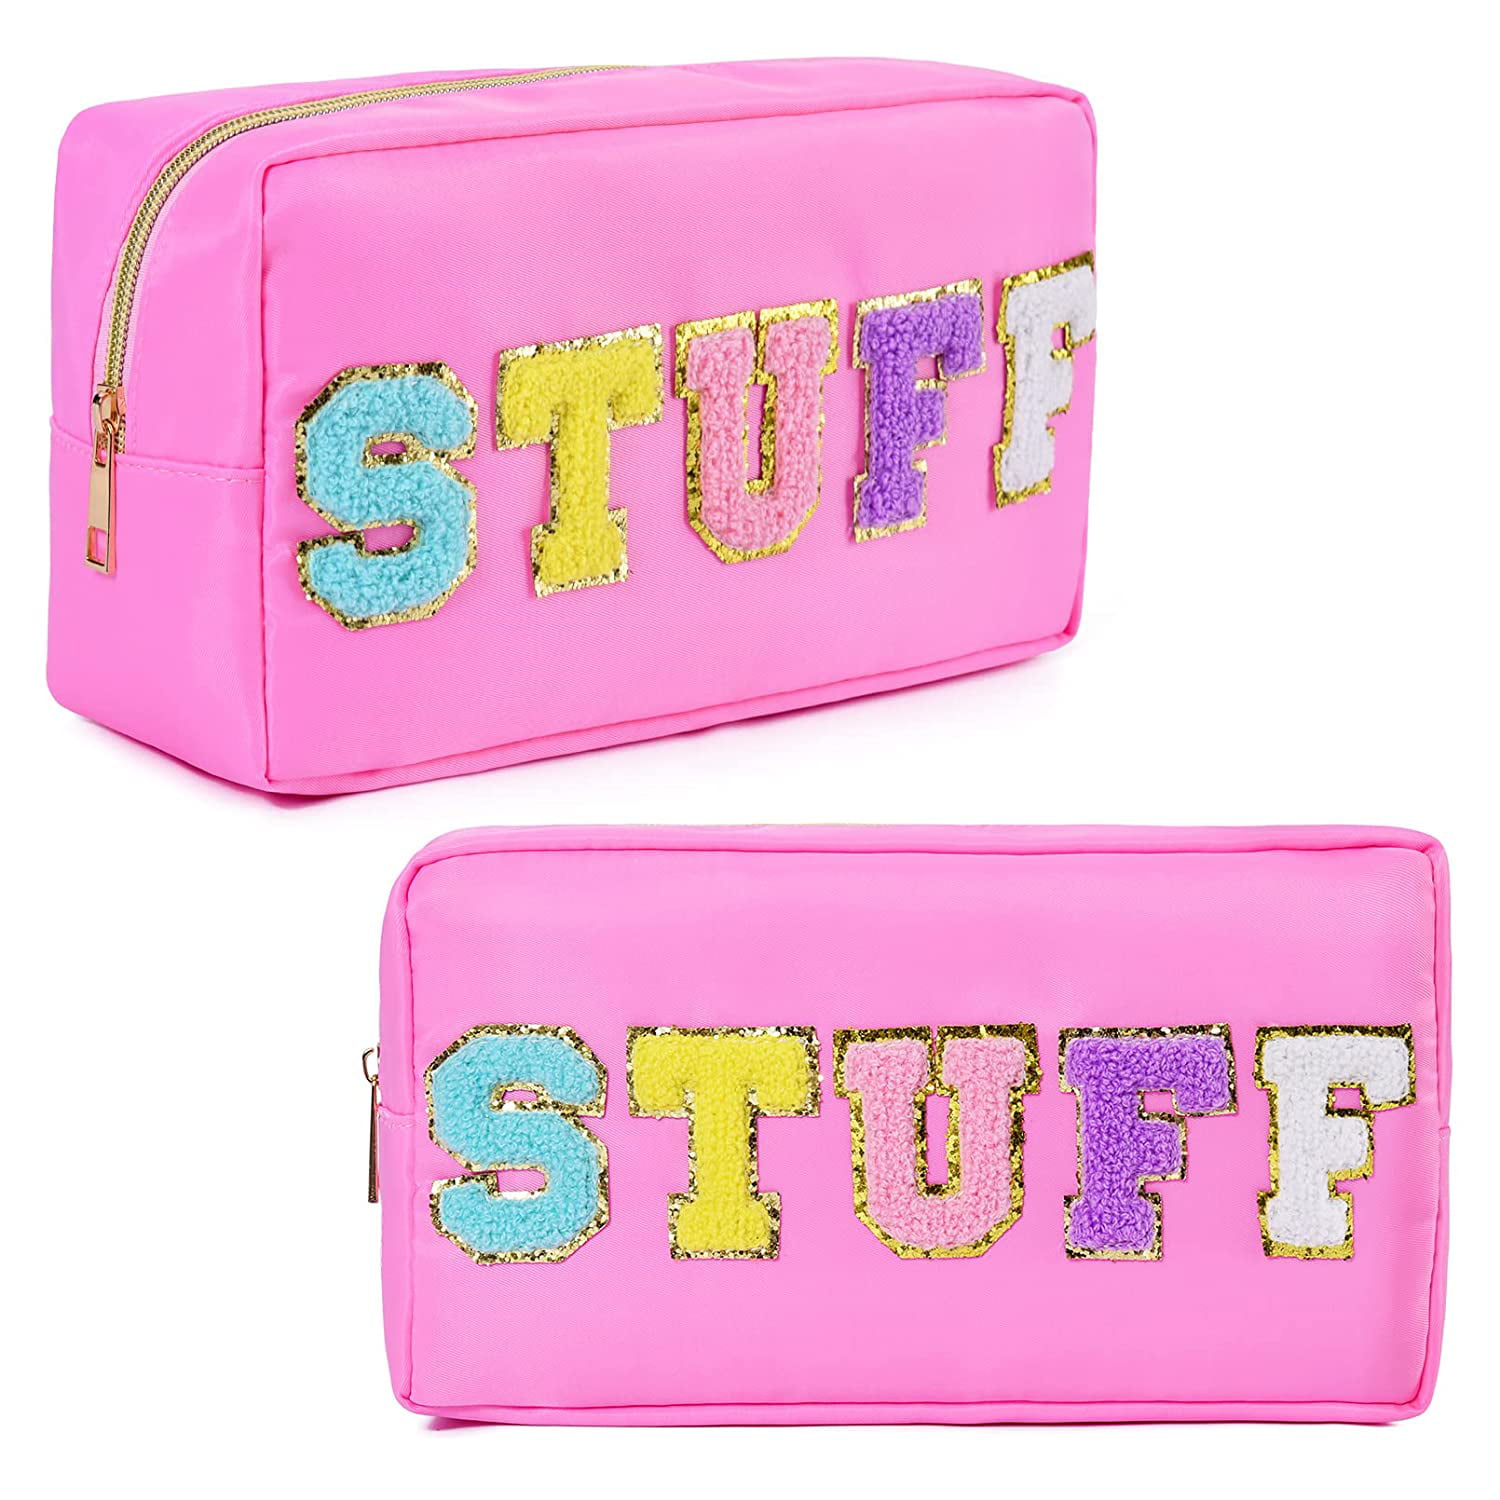 2 Pack Preppy Patch Makeup Bag Cosmetic Travel Toiletry Bag For Women Teen  Girls Preppy Stuff Cute Pink Makeup Pouch Organizer Bag, Gifts For Women Gi